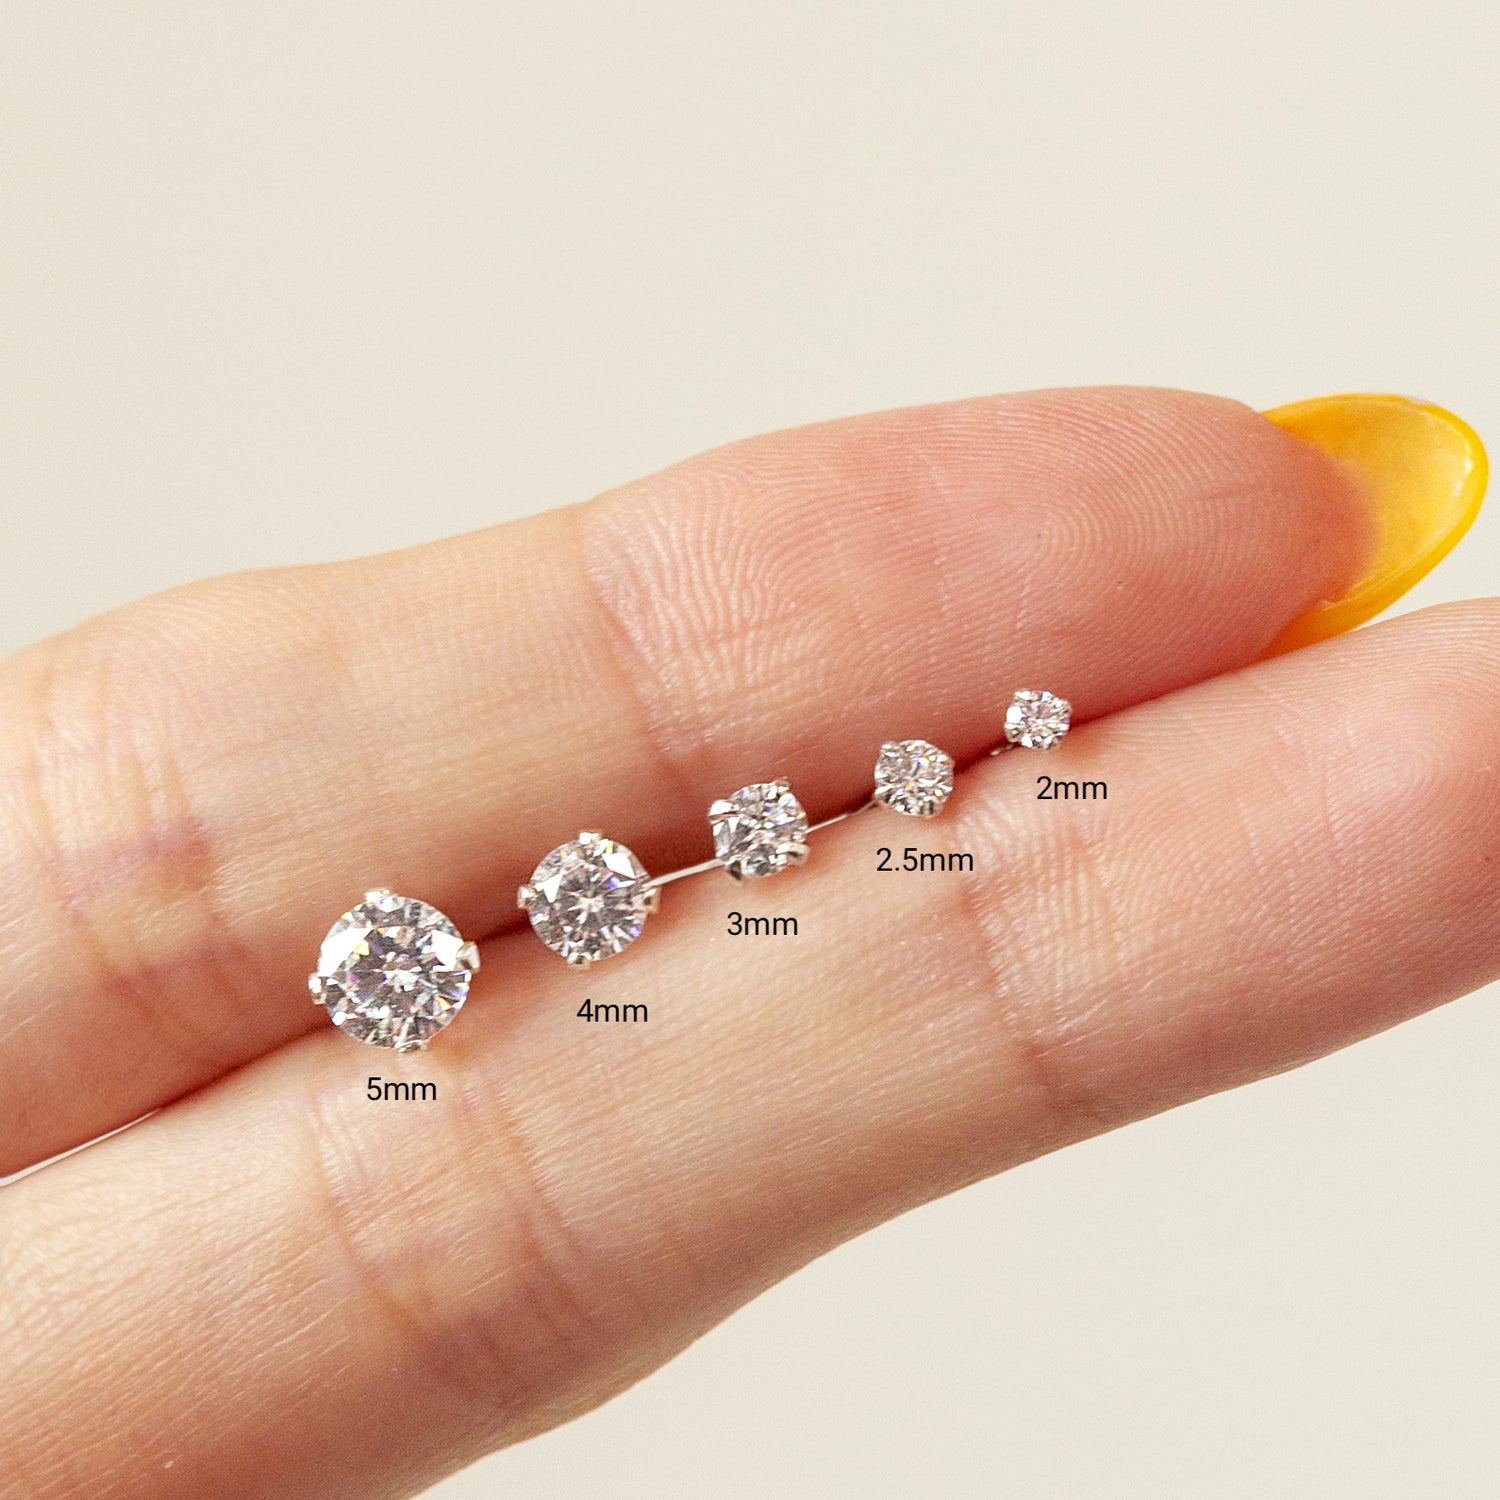 Pocket-Friendly Wholesale make earring studs For All Occasions